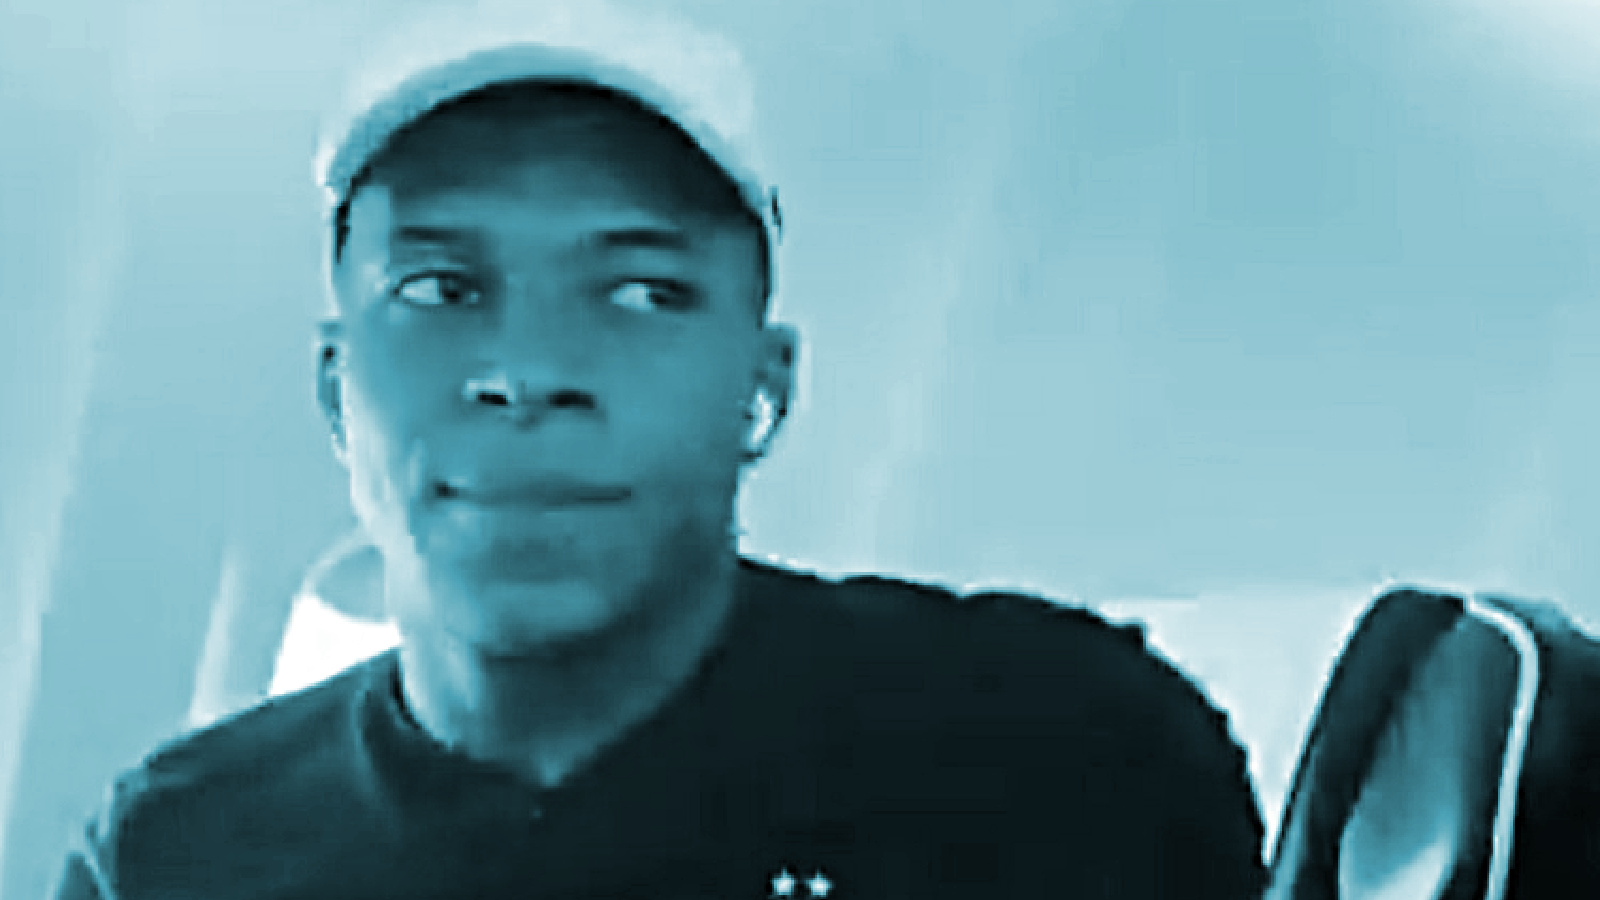 Kylian Mbappe's deadpan facial reaction after Antoine Griezmann informs that he has bought him for Newcastle United on Football Manager